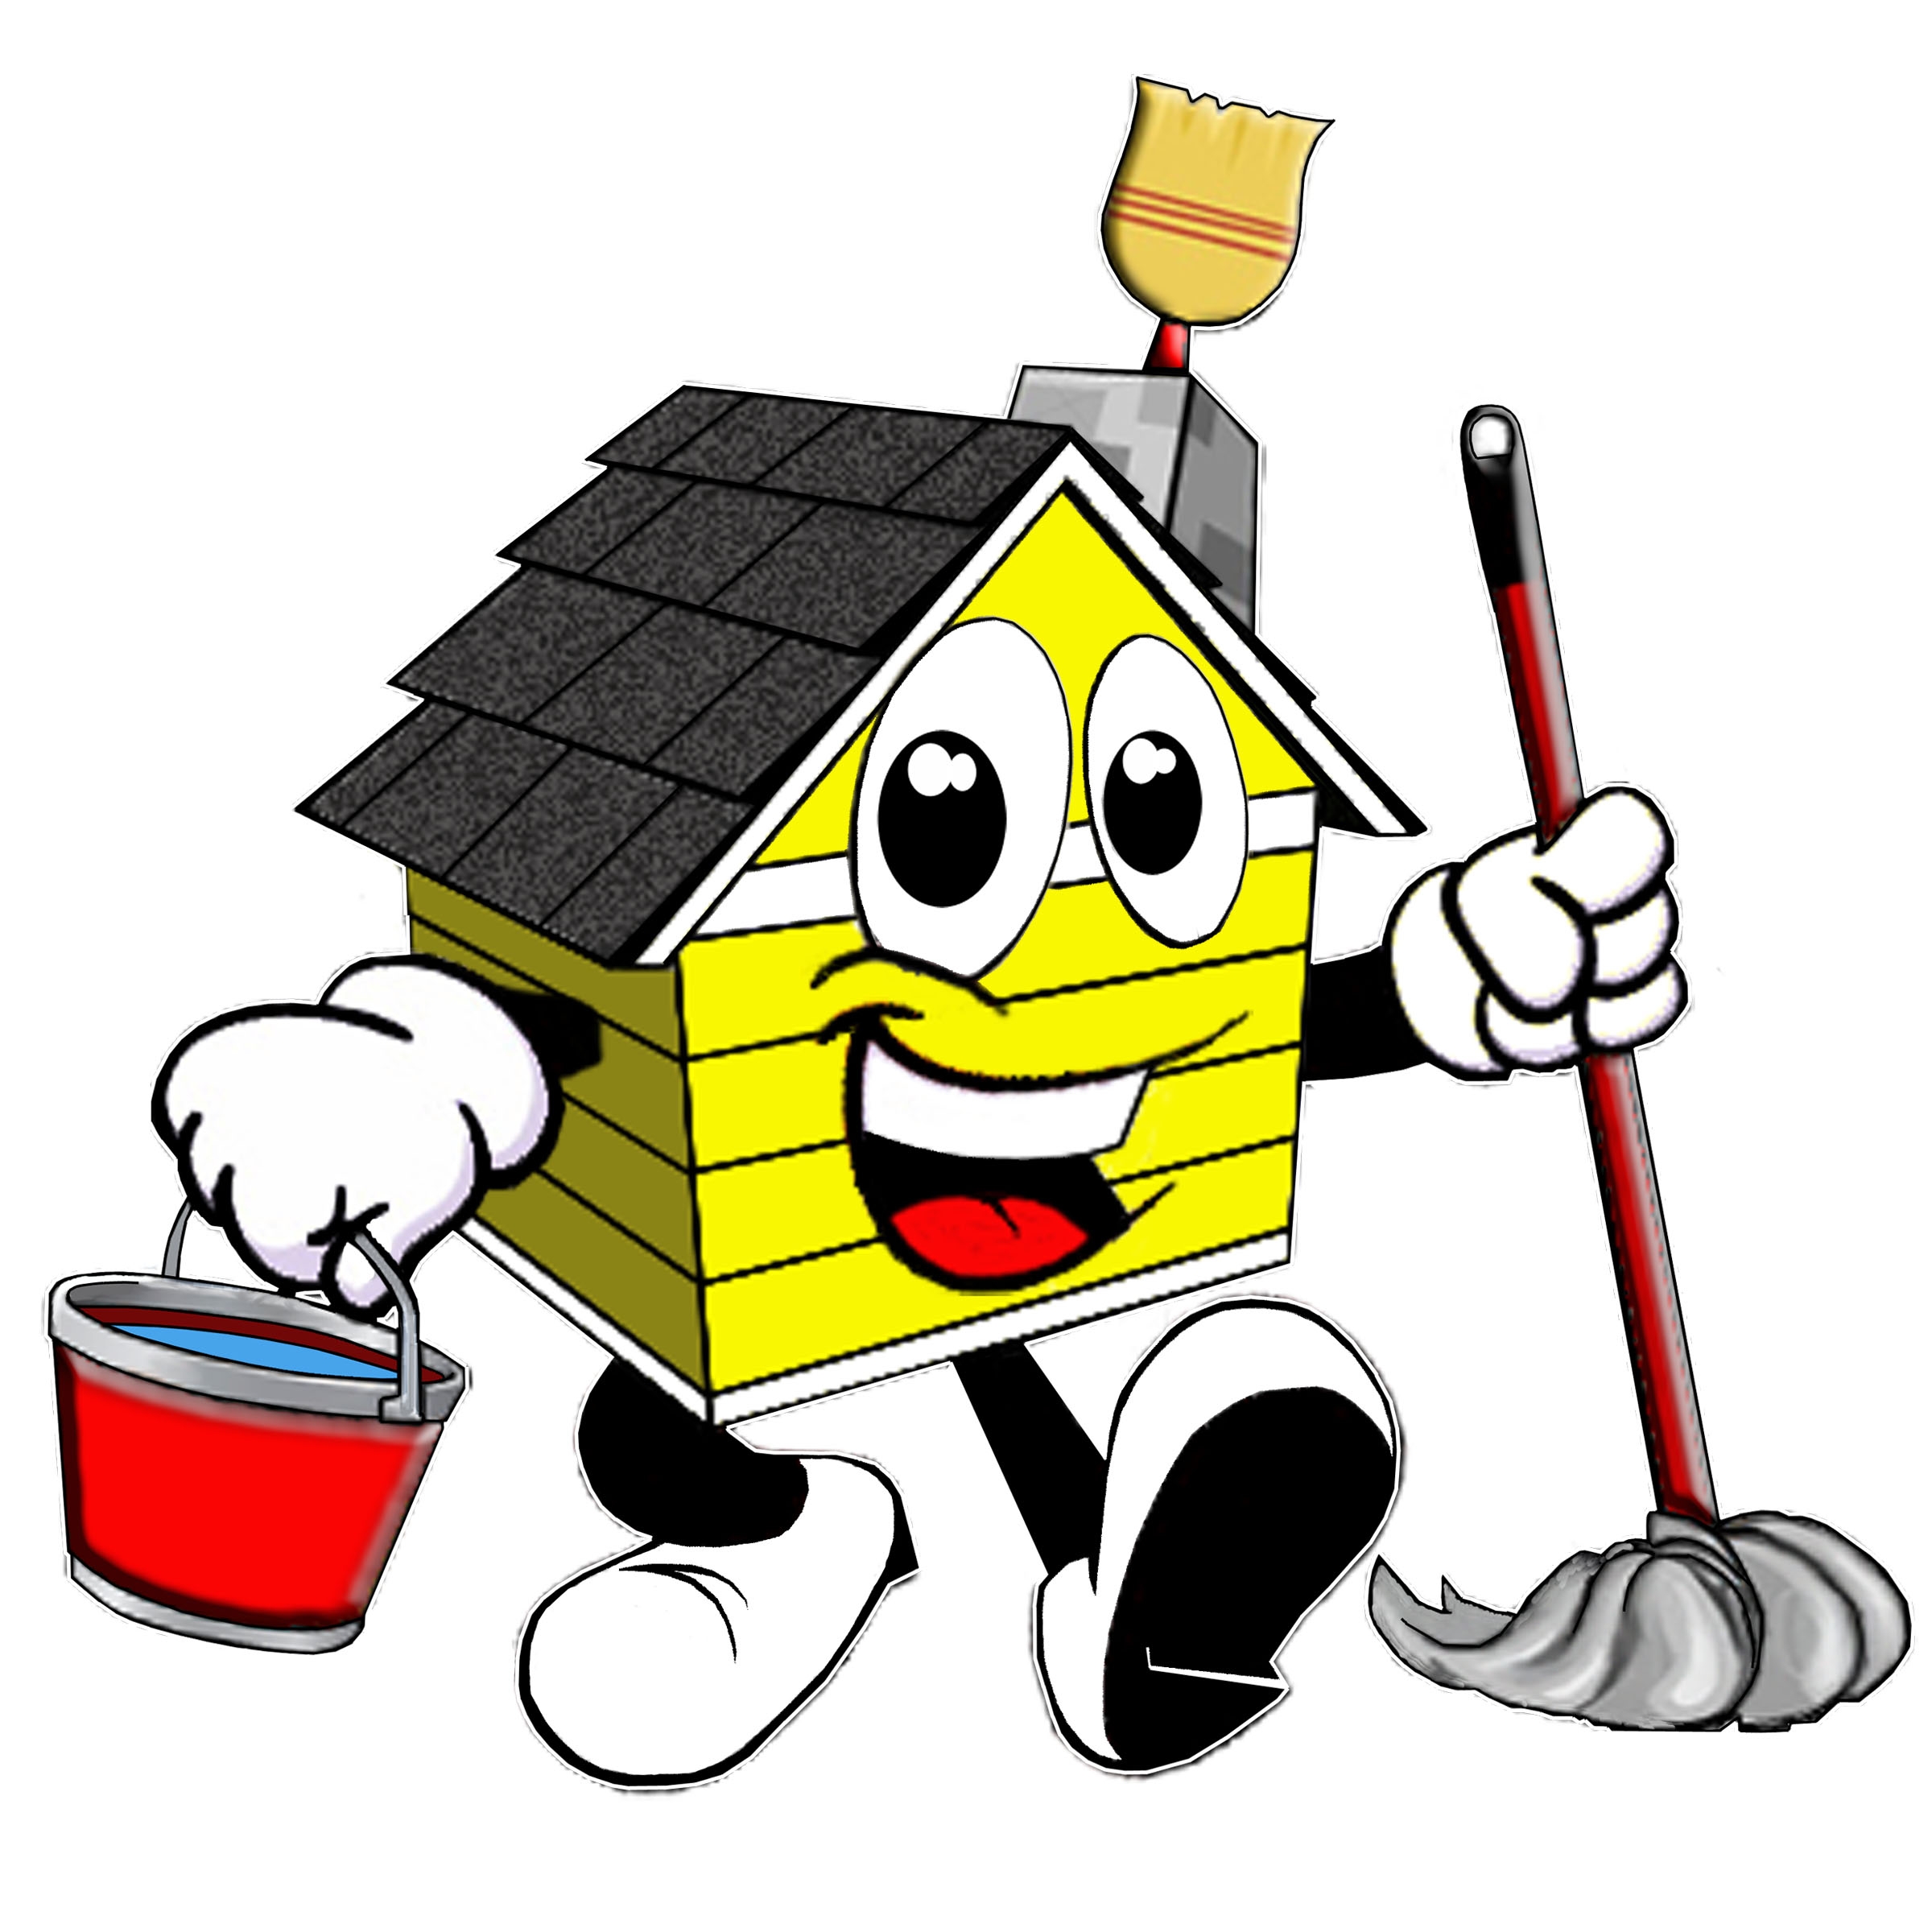 Cleaning supplies clipart